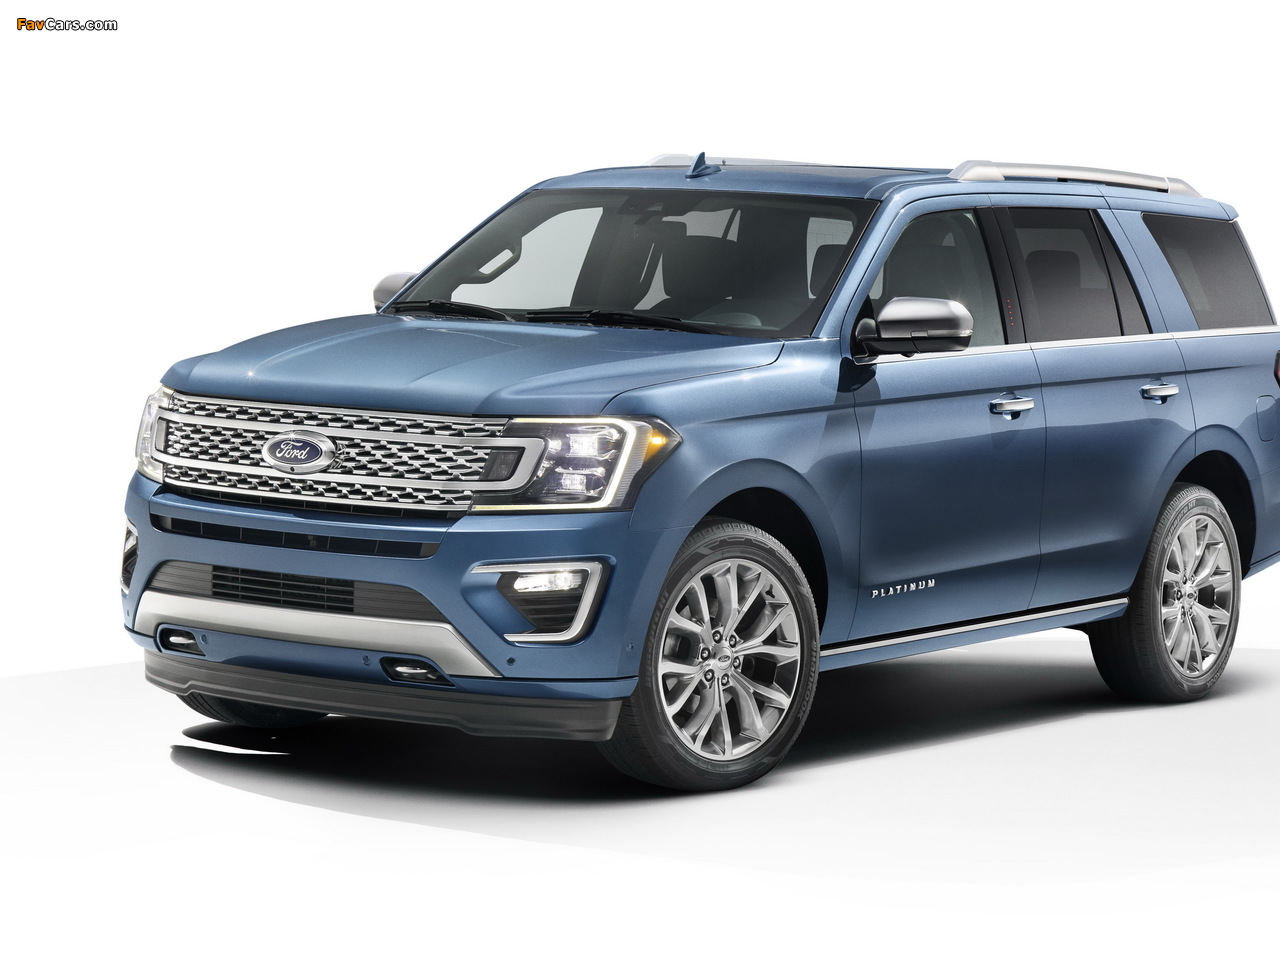 Ford Expedition Platinum 2017 pictures (1280 x 960)